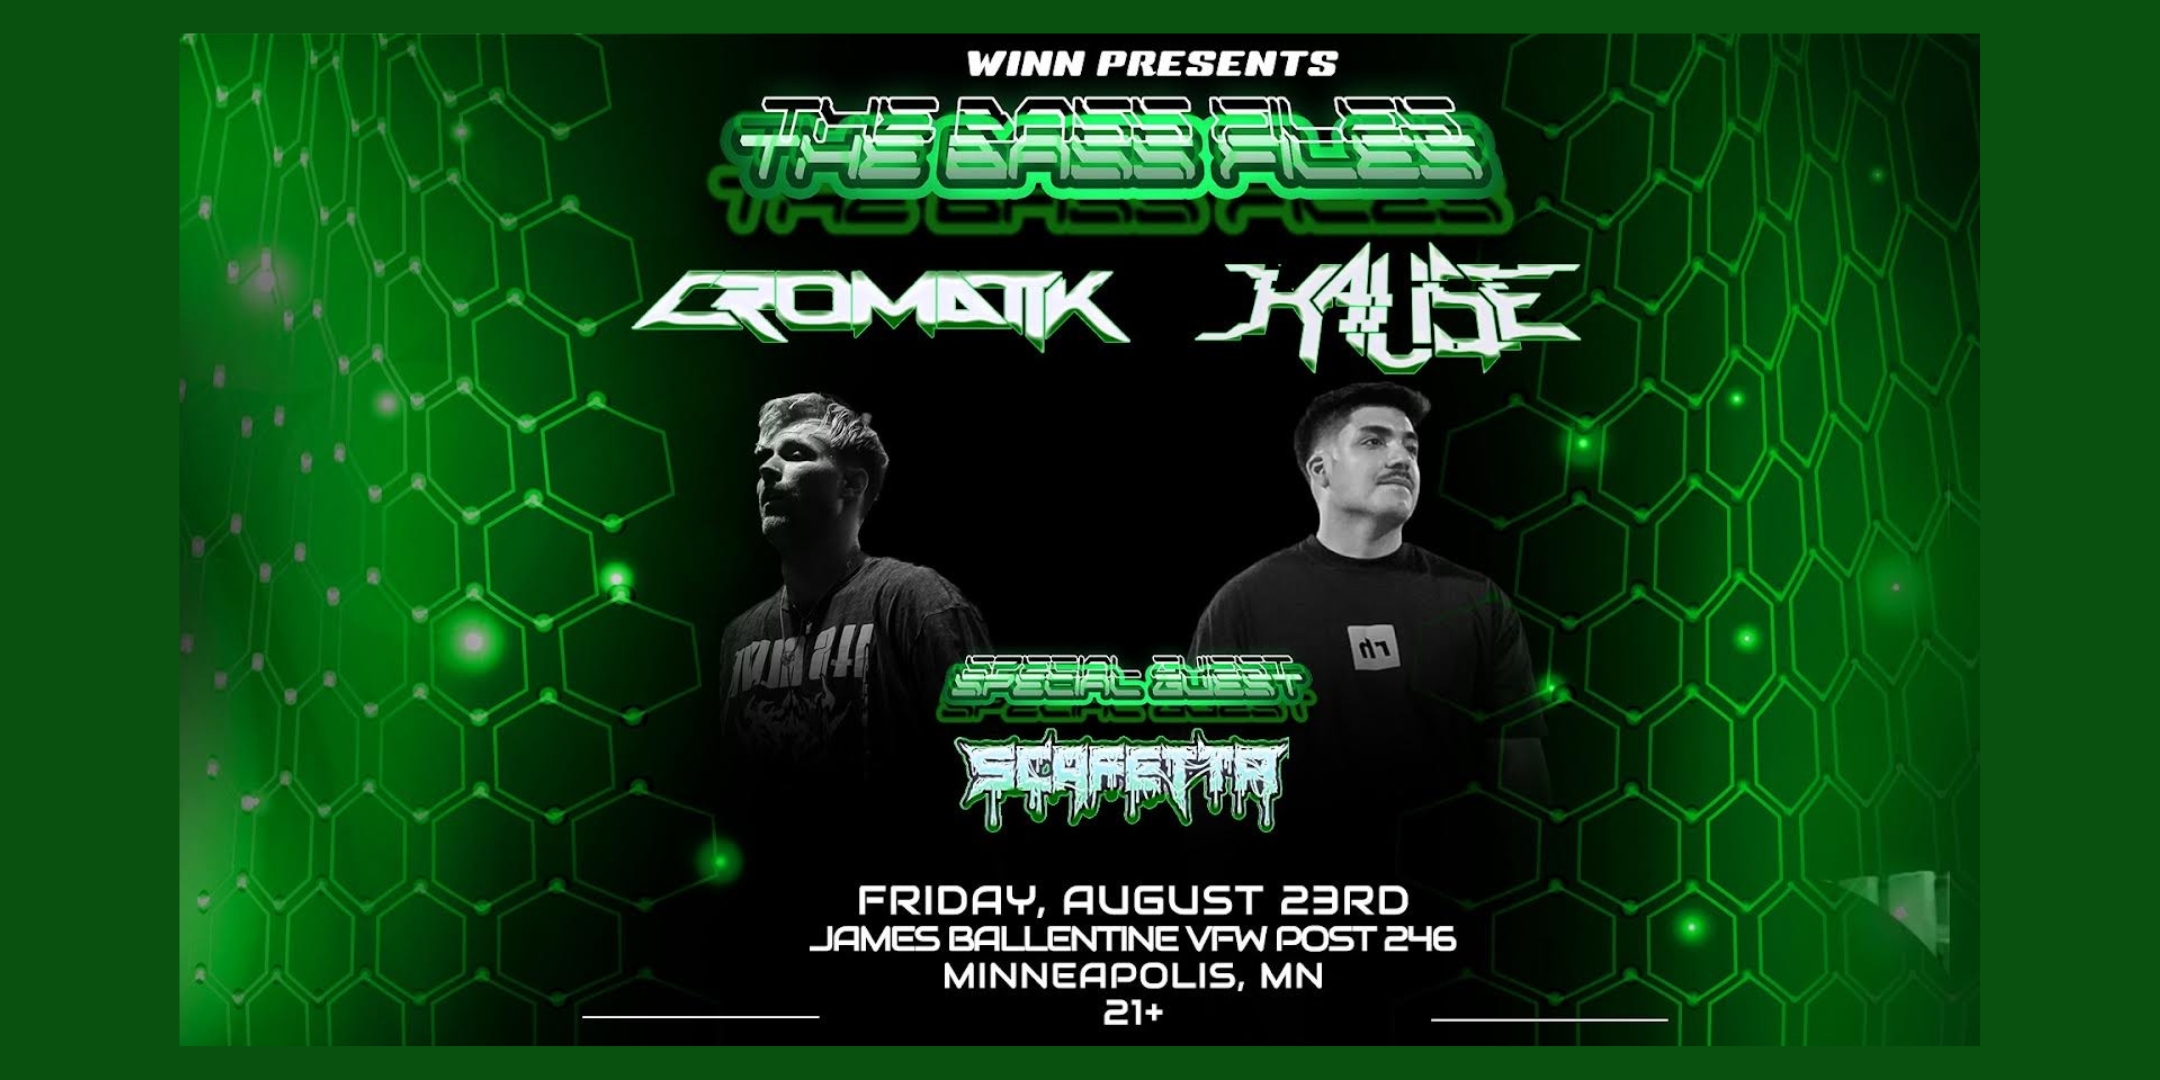 WINN PRESENTS: THE BASS FILES!! featuring CROMATIK KAUSE + SCAFETTA & more Friday August 23 James Ballentine “Uptown” VFW Post 246 Doors 8:00pm :: Music 8:00pm :: 21+ GA $15 Early Bird / $20 ADV / $25 DOS Tickets On Sale Now